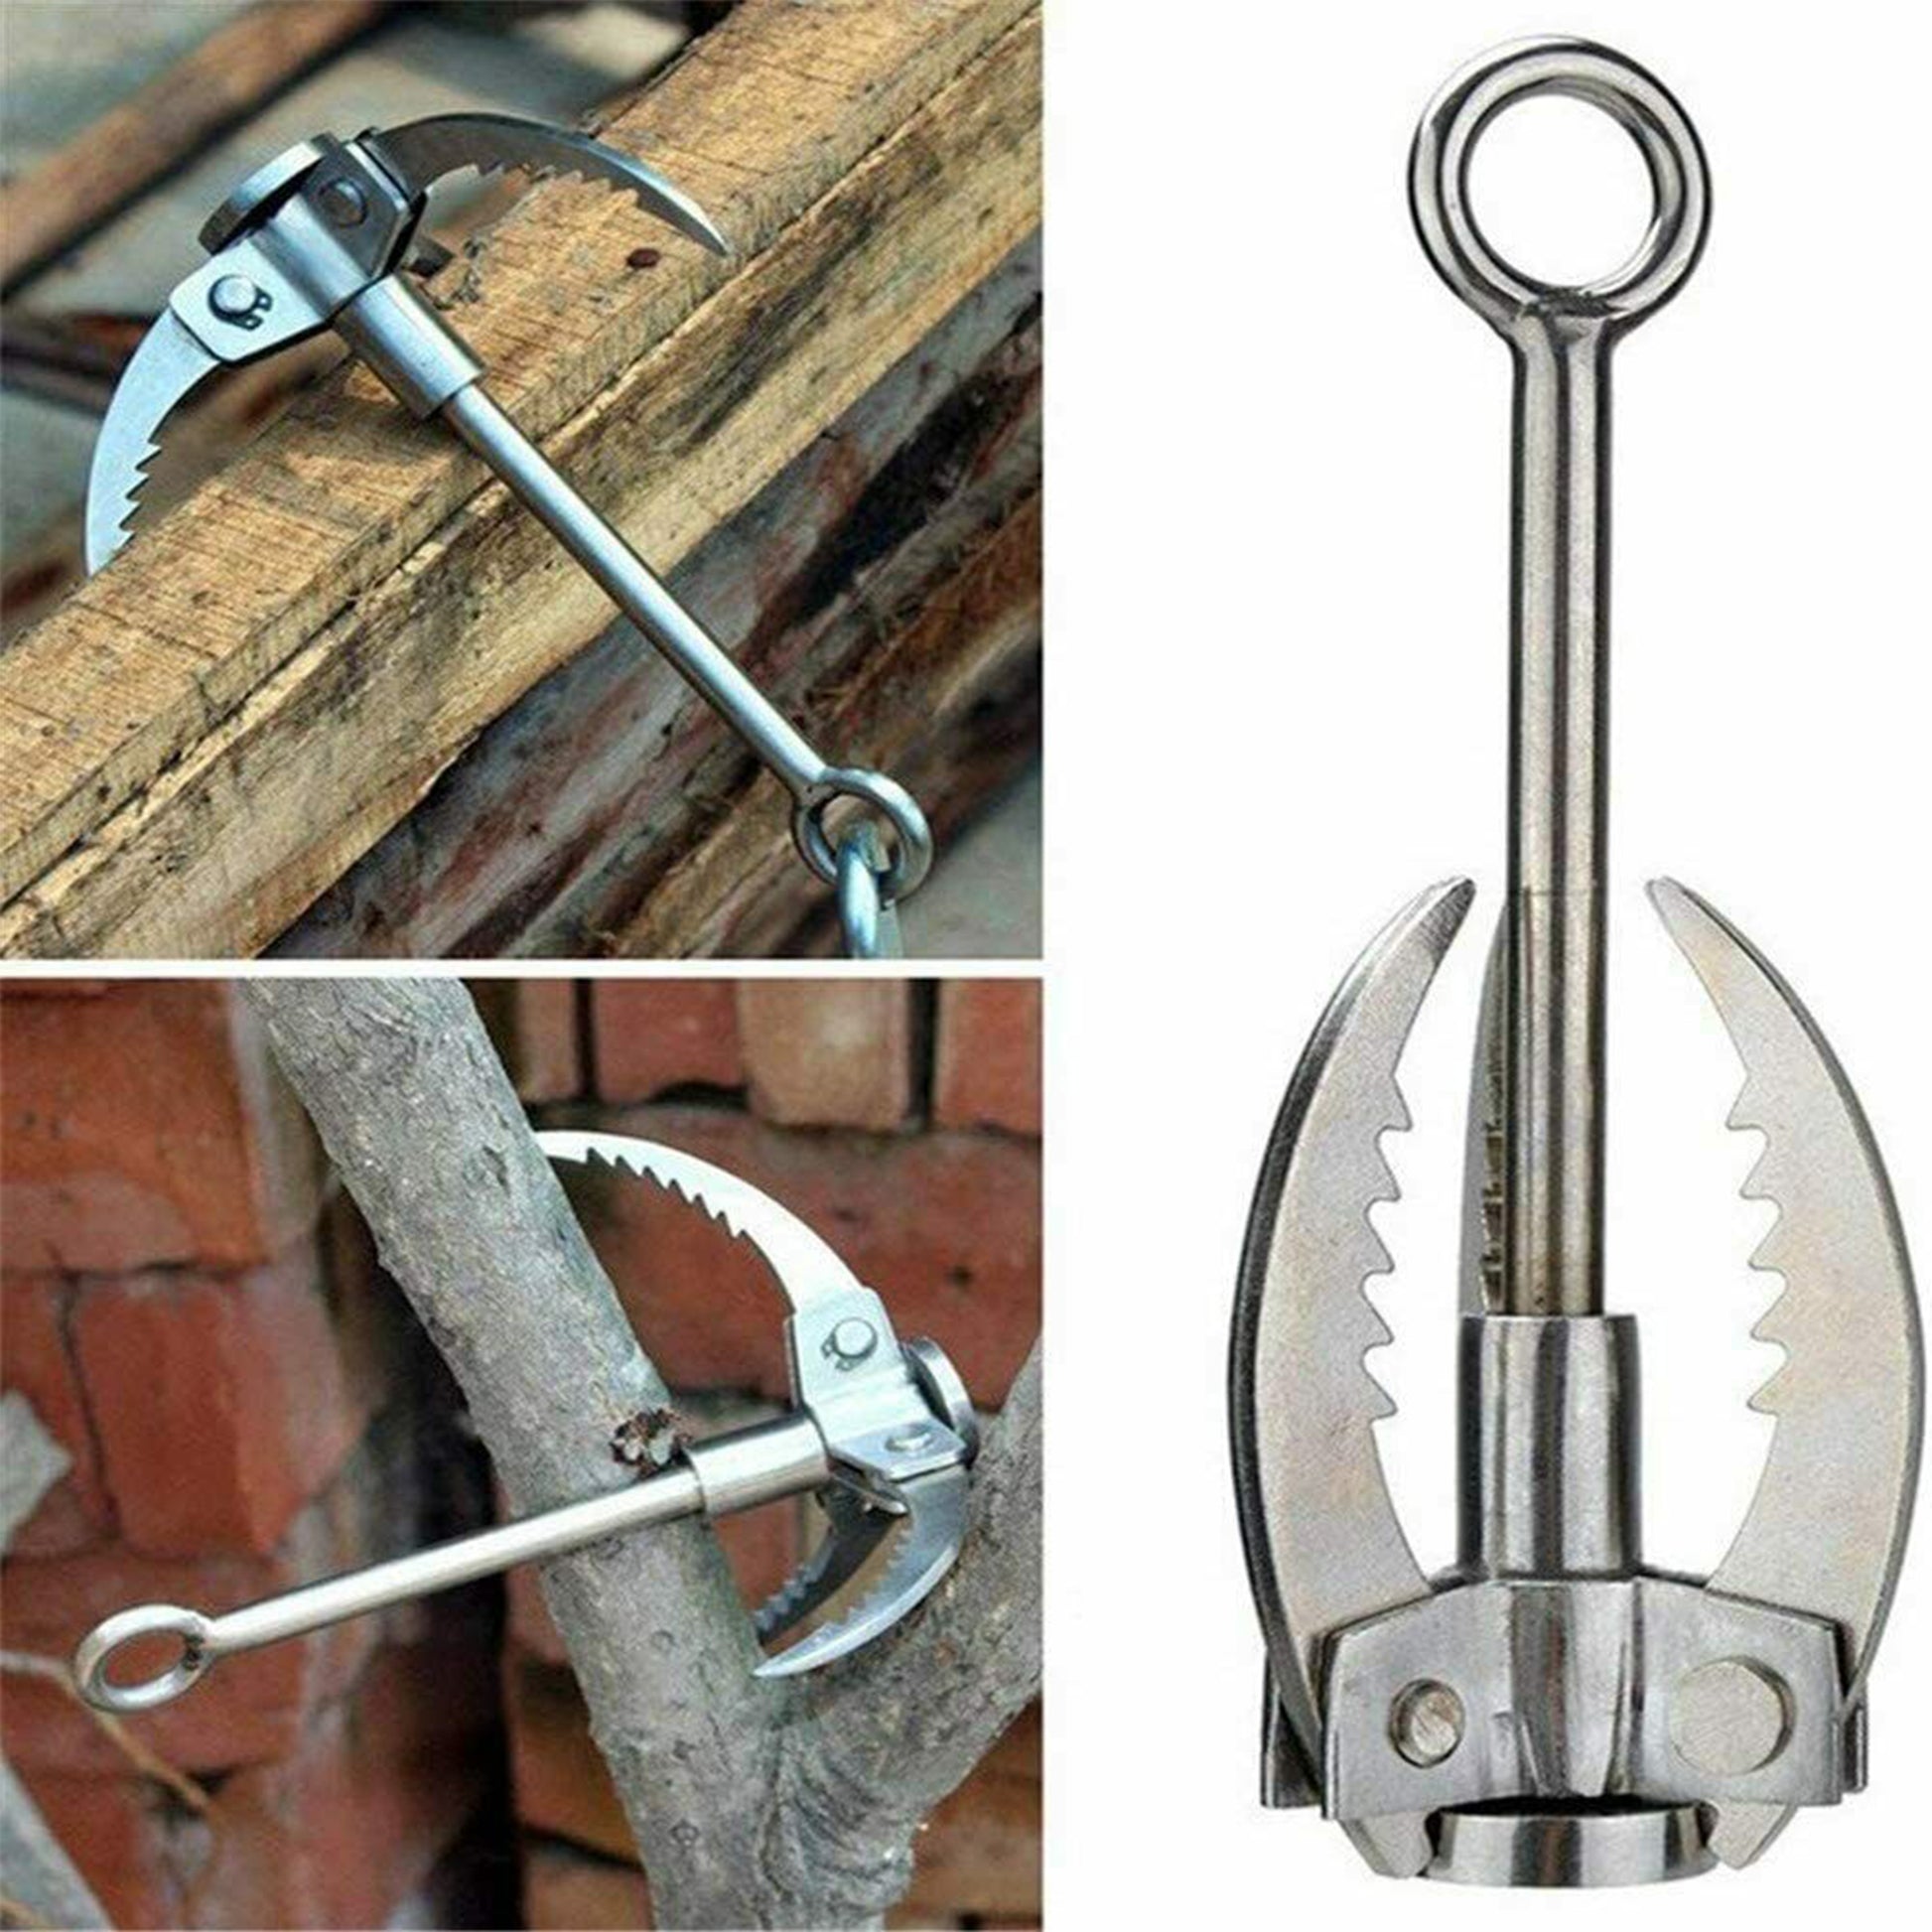 Stainless Steel Grapple Claw with 3 Folding Claws for Hiking